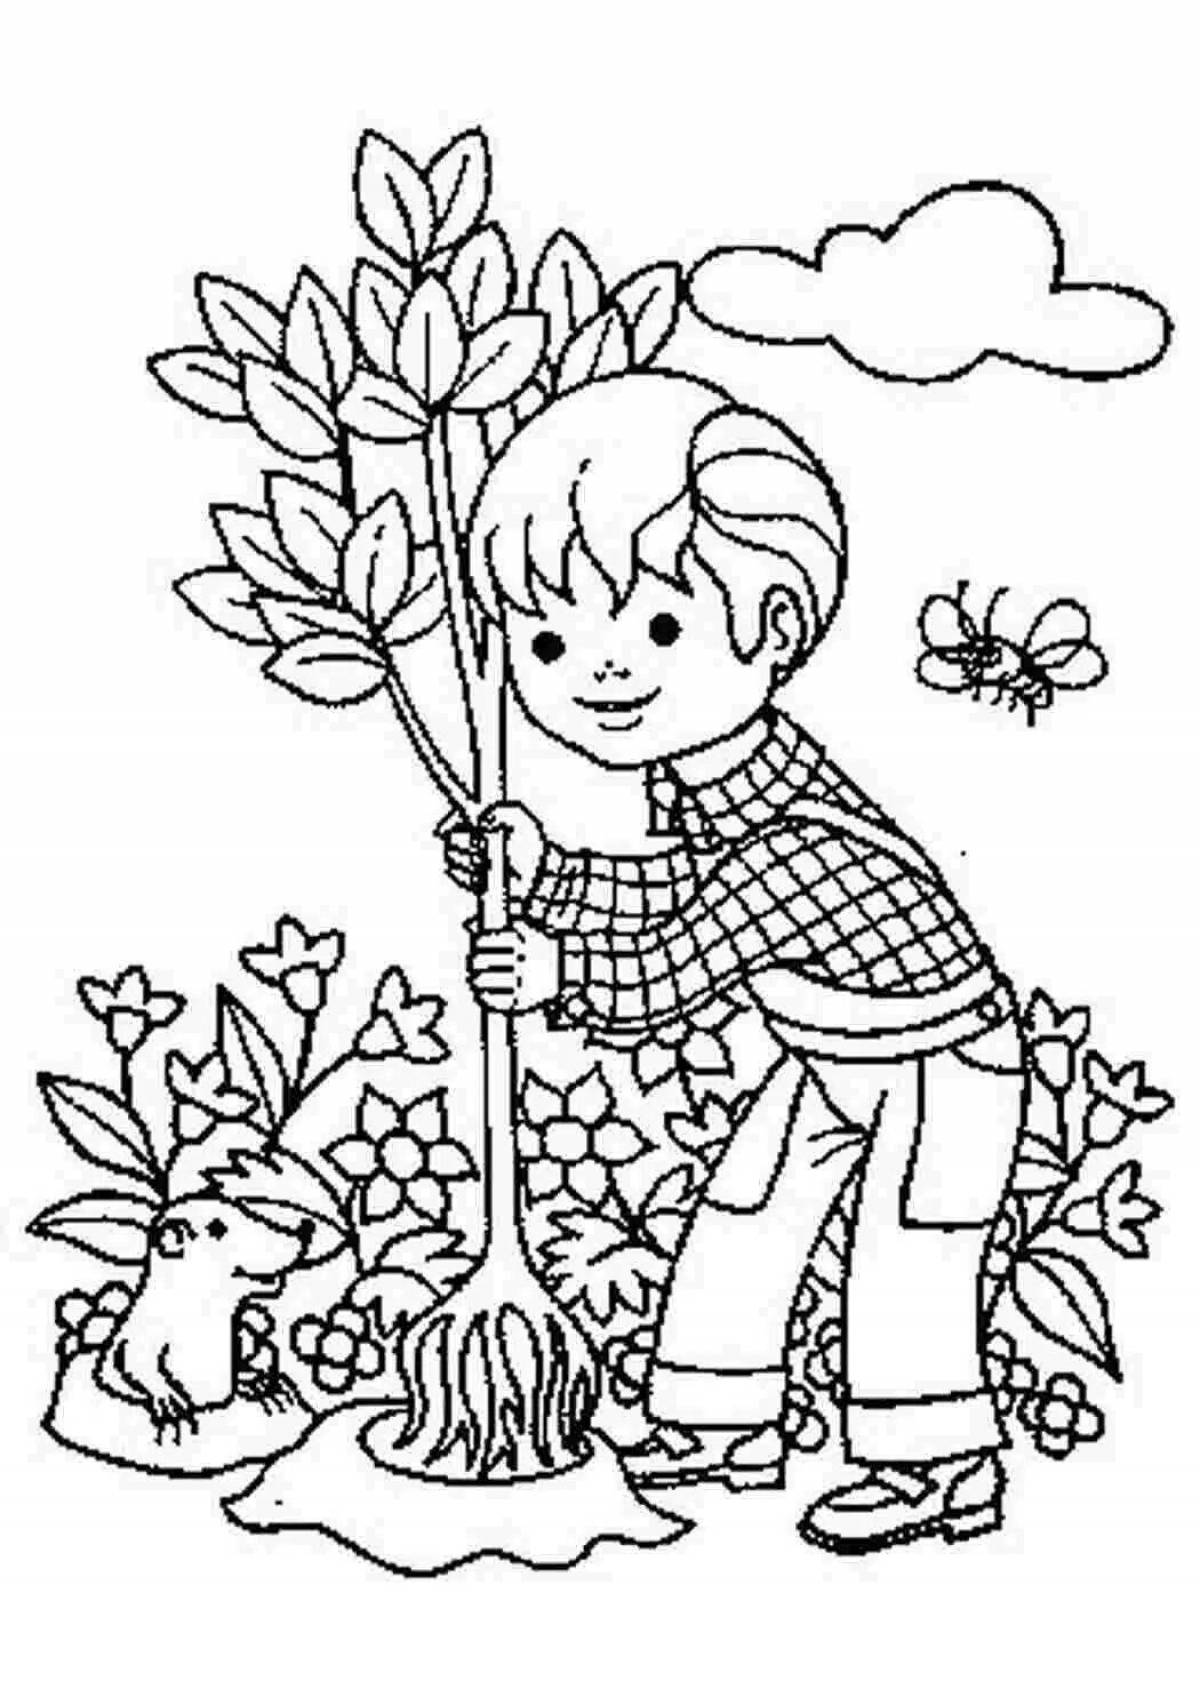 Coloring book sparkling take care of nature